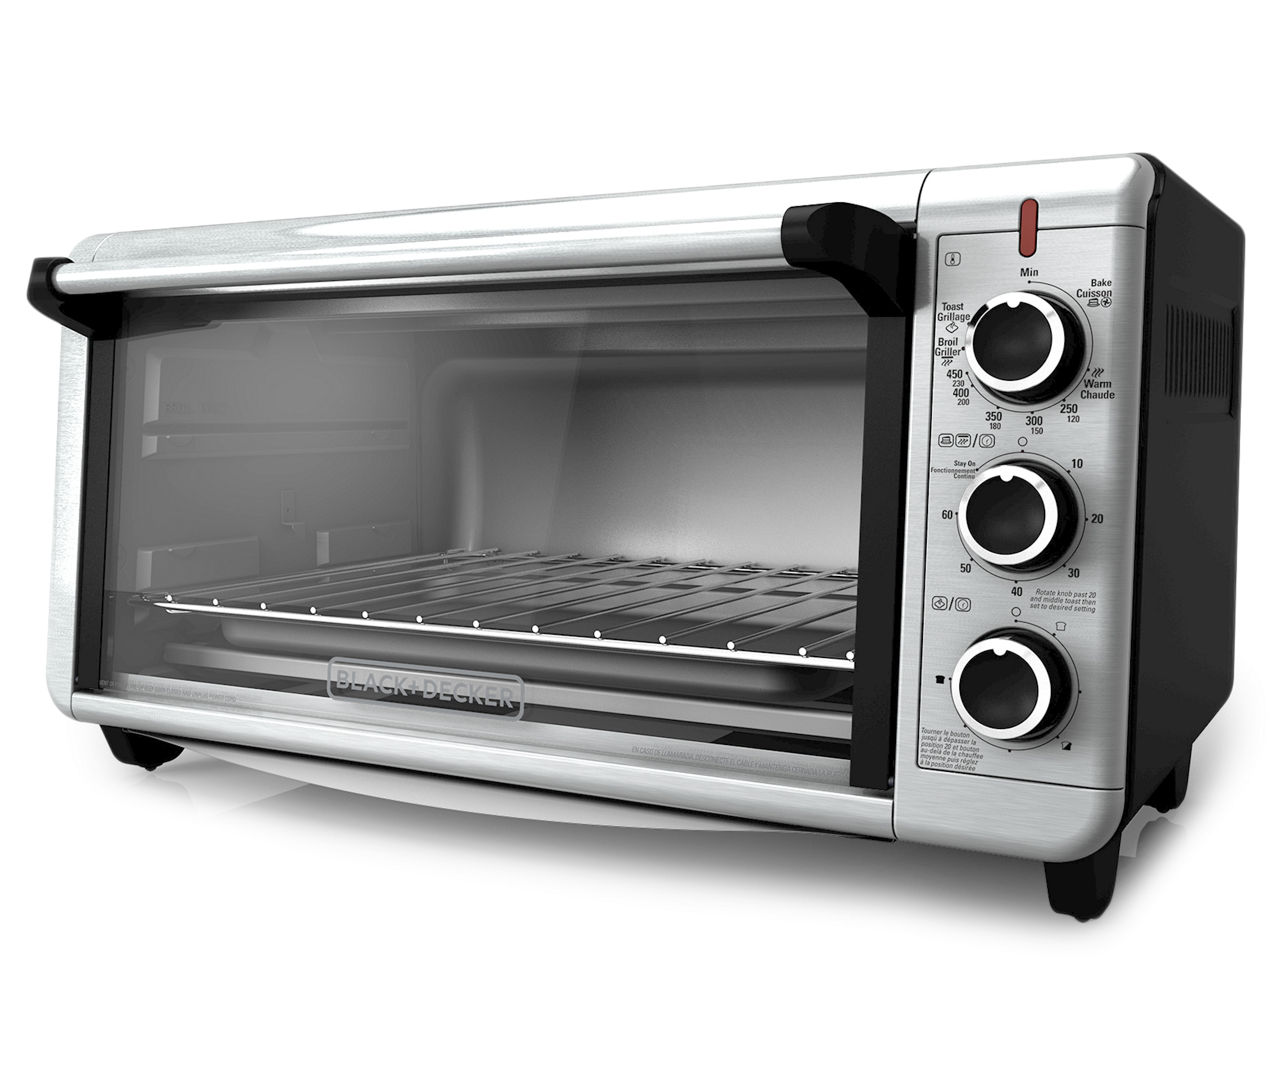 Black & Decker Stainless Steel Convection Countertop Oven - Shop